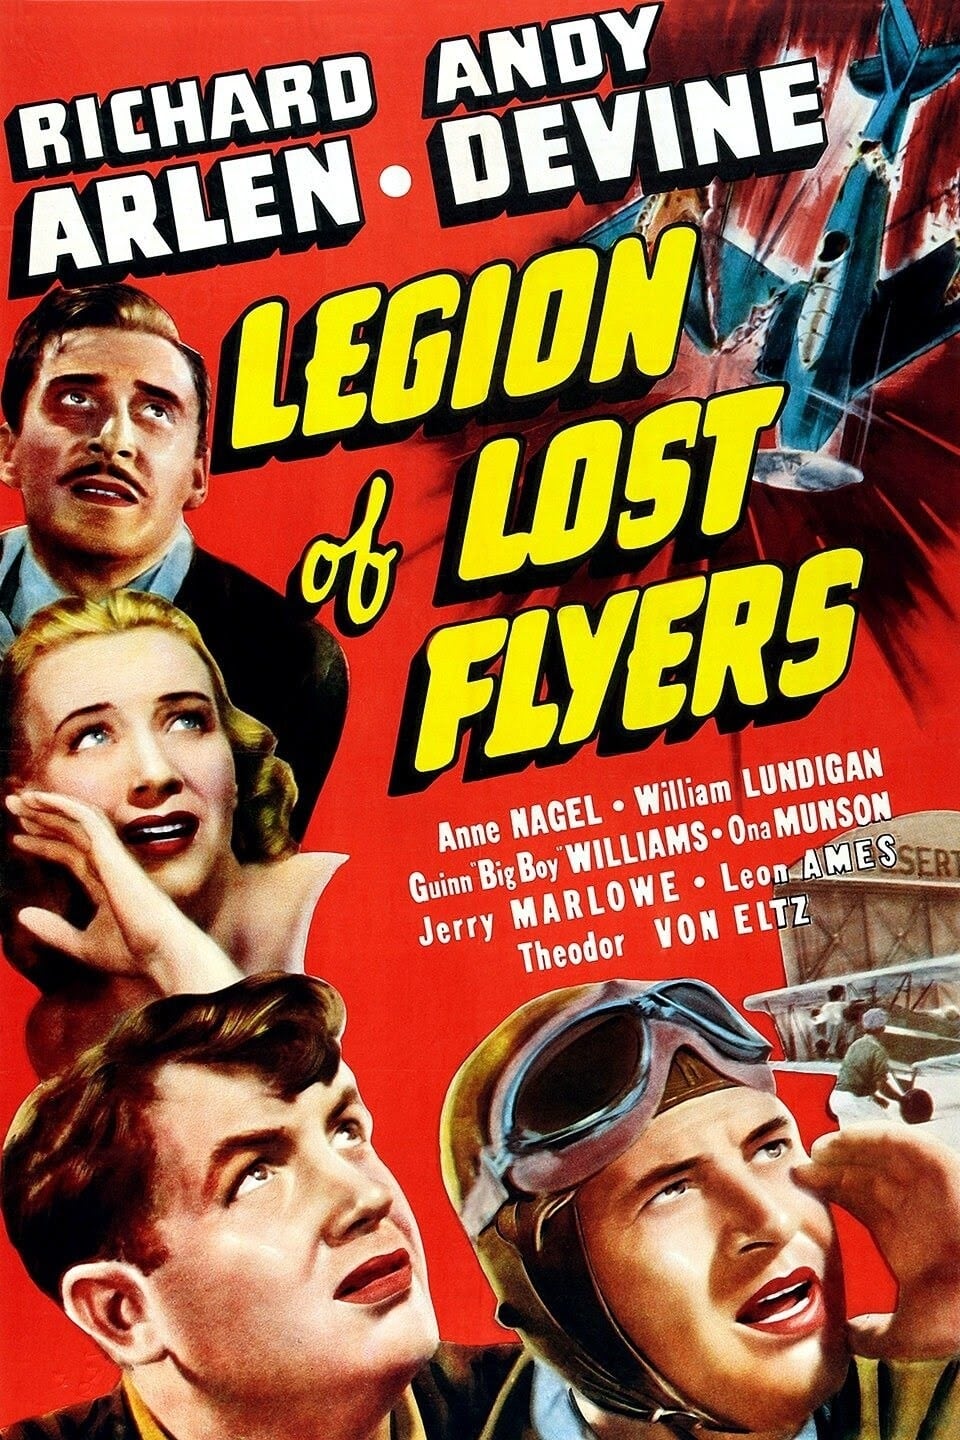 Legion of Lost Flyers (1939)